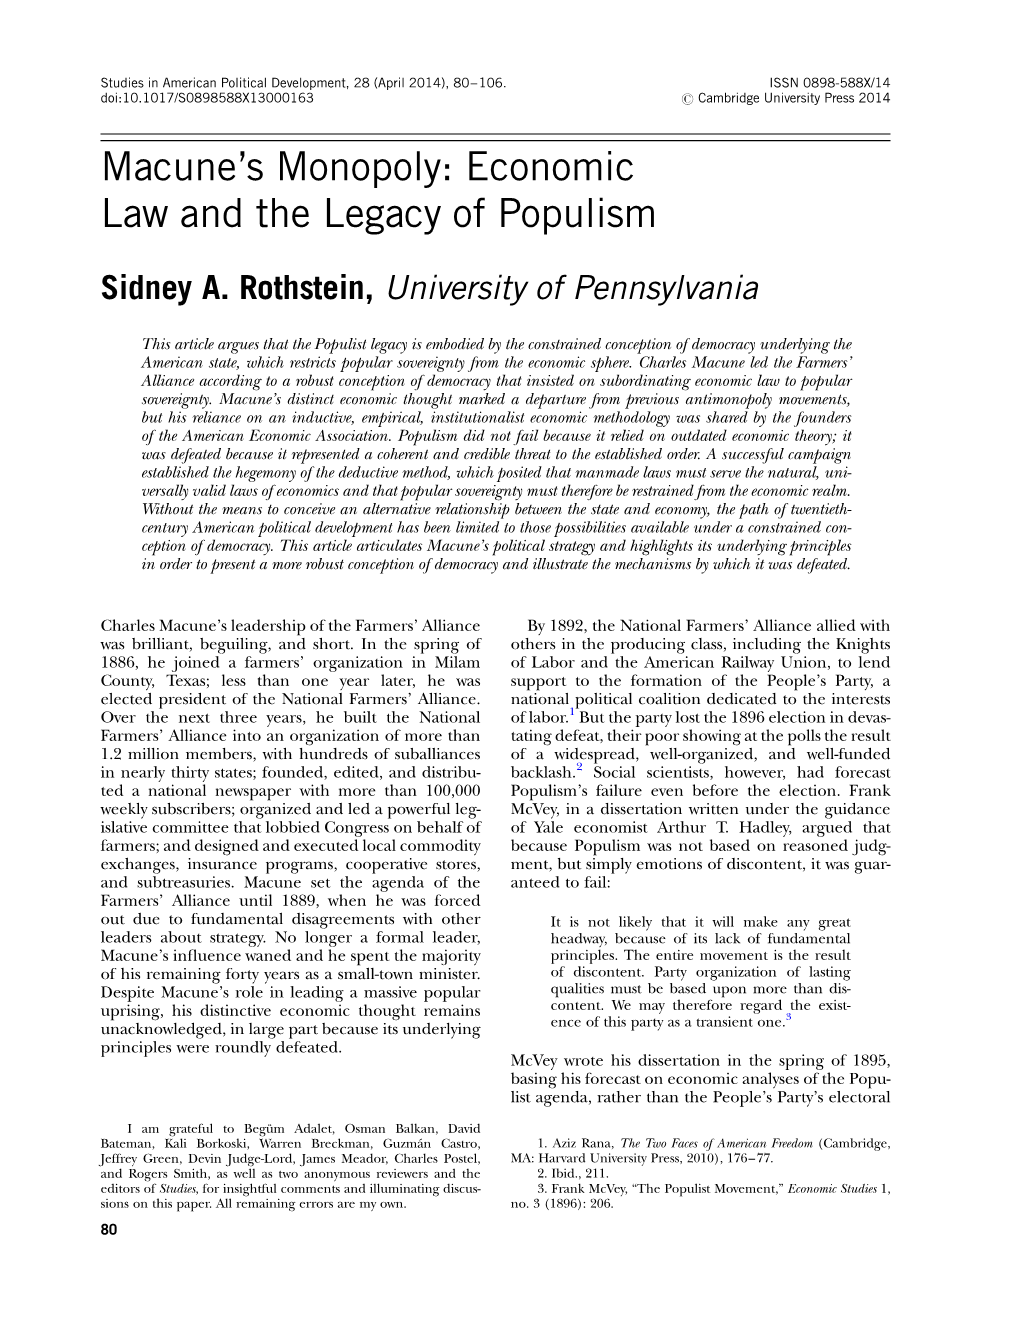 Macune's Monopoly: Economic Law and the Legacy of Populism